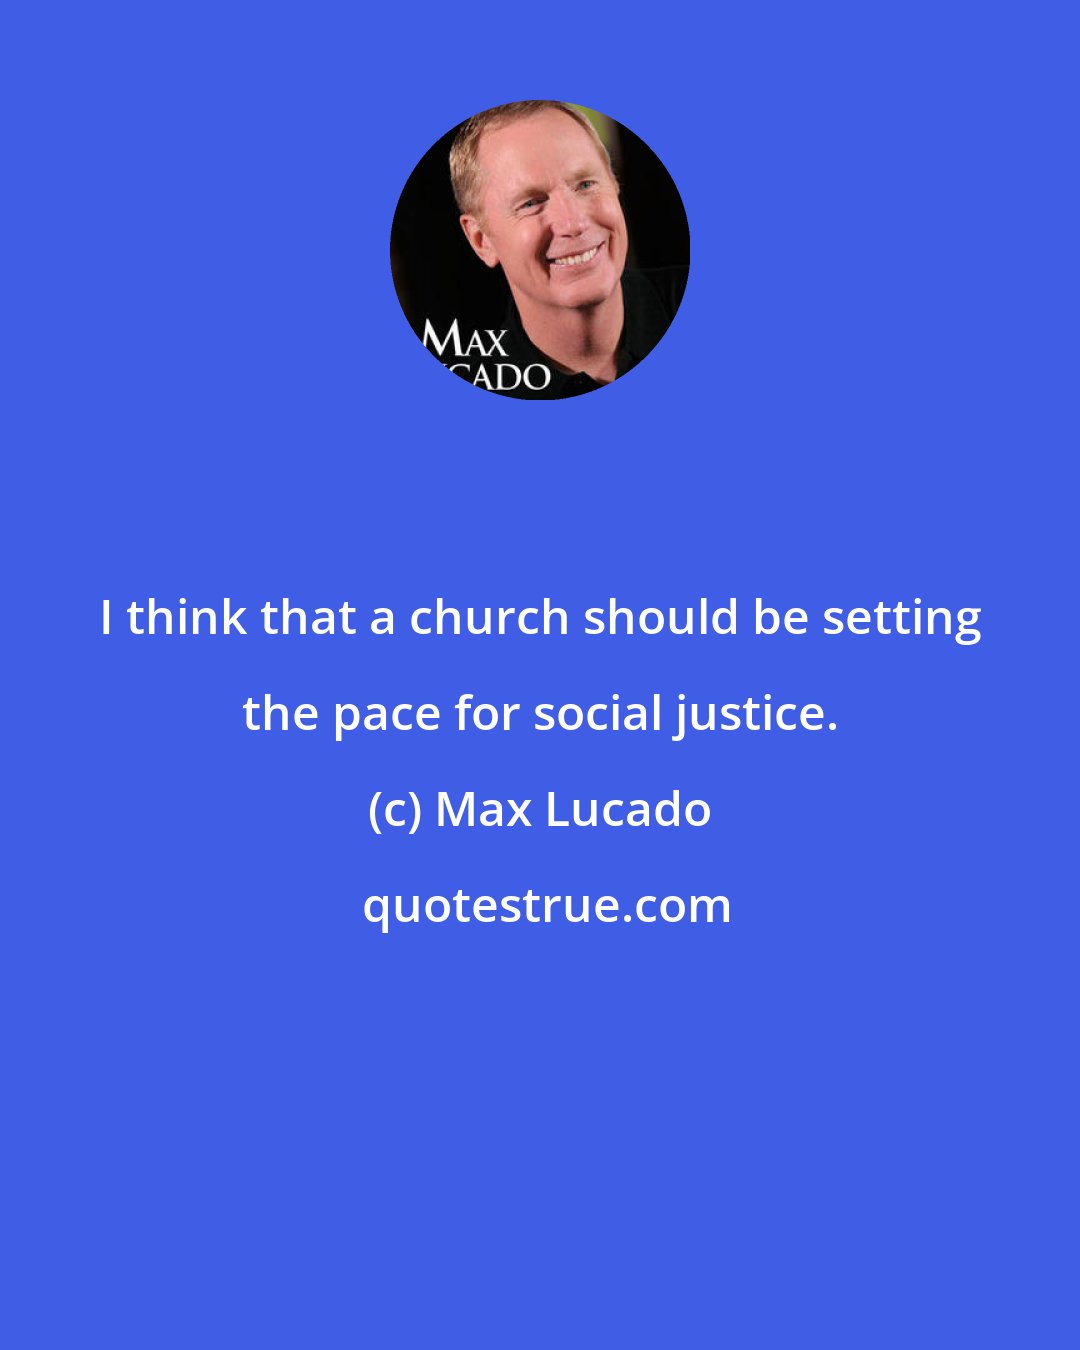 Max Lucado: I think that a church should be setting the pace for social justice.